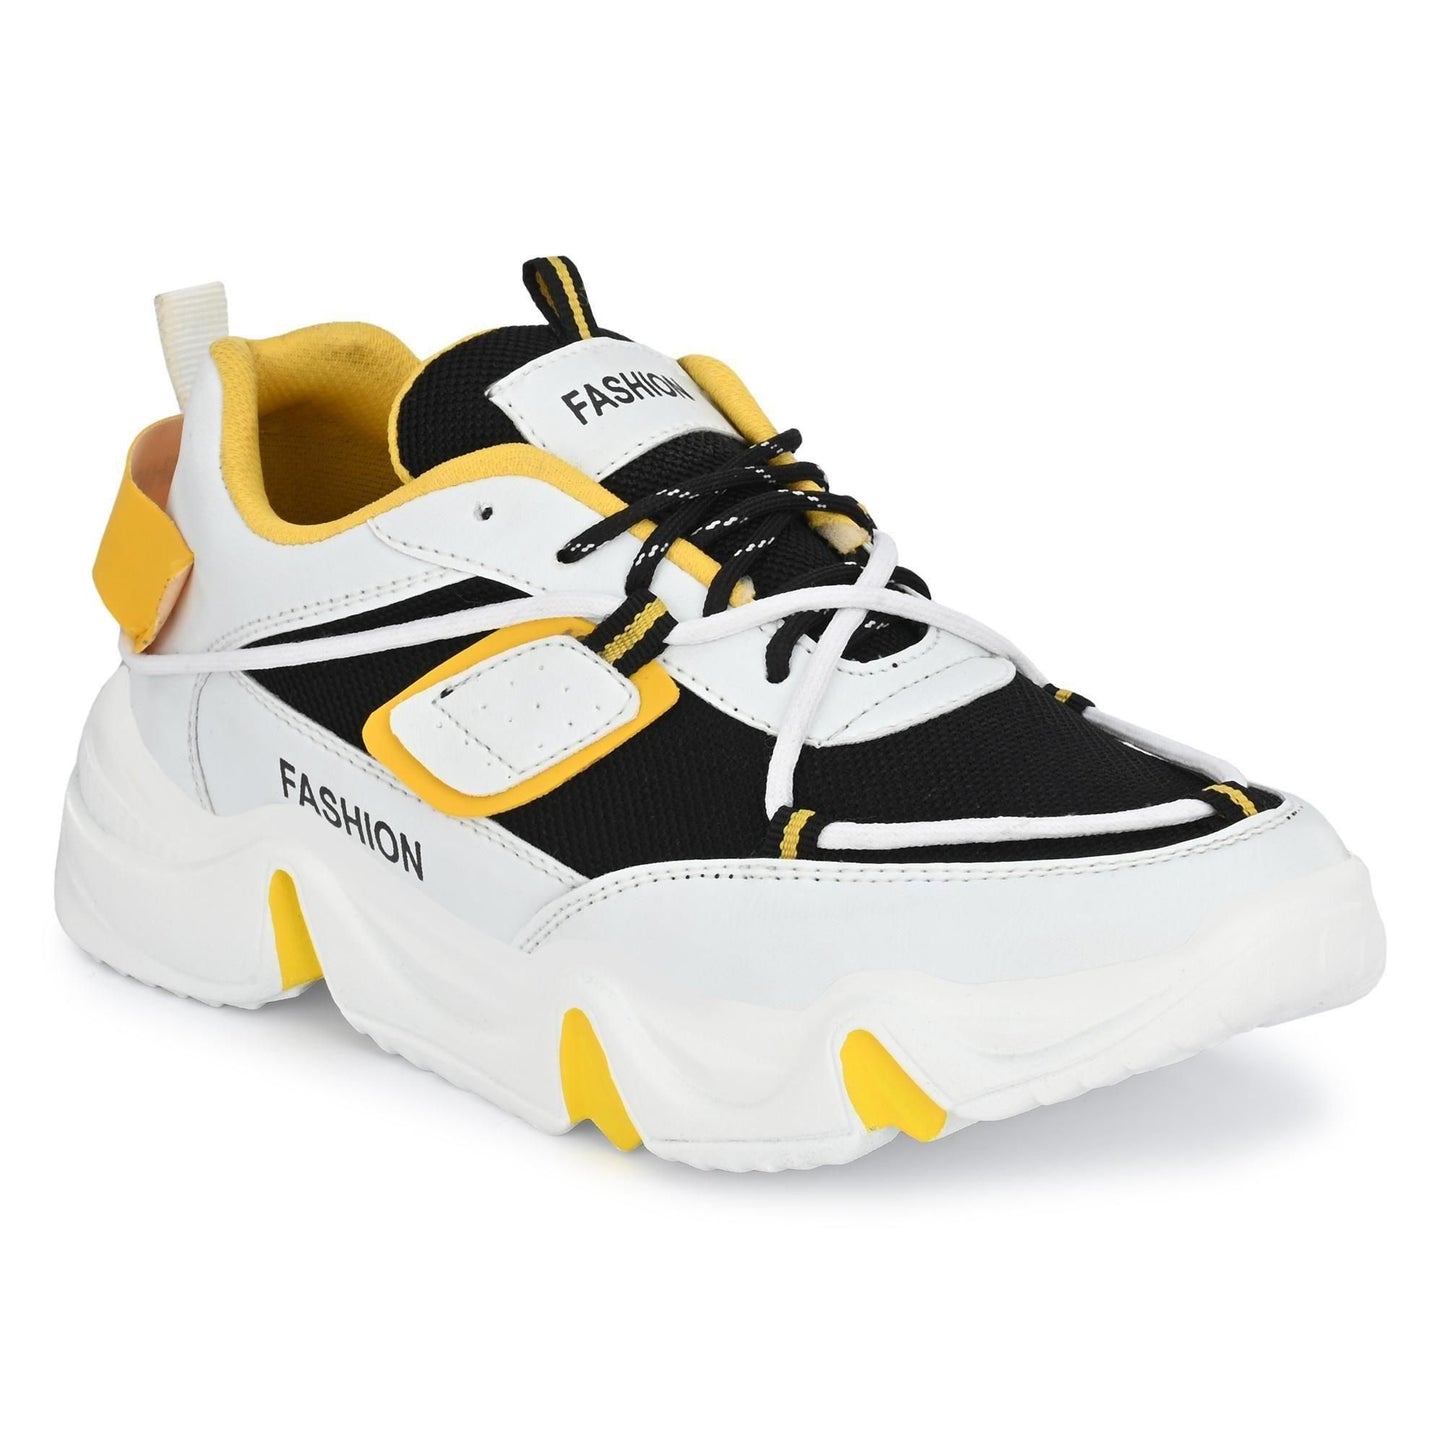 DS AM PM Roddick Light Weight Fashionable Sports Shoes